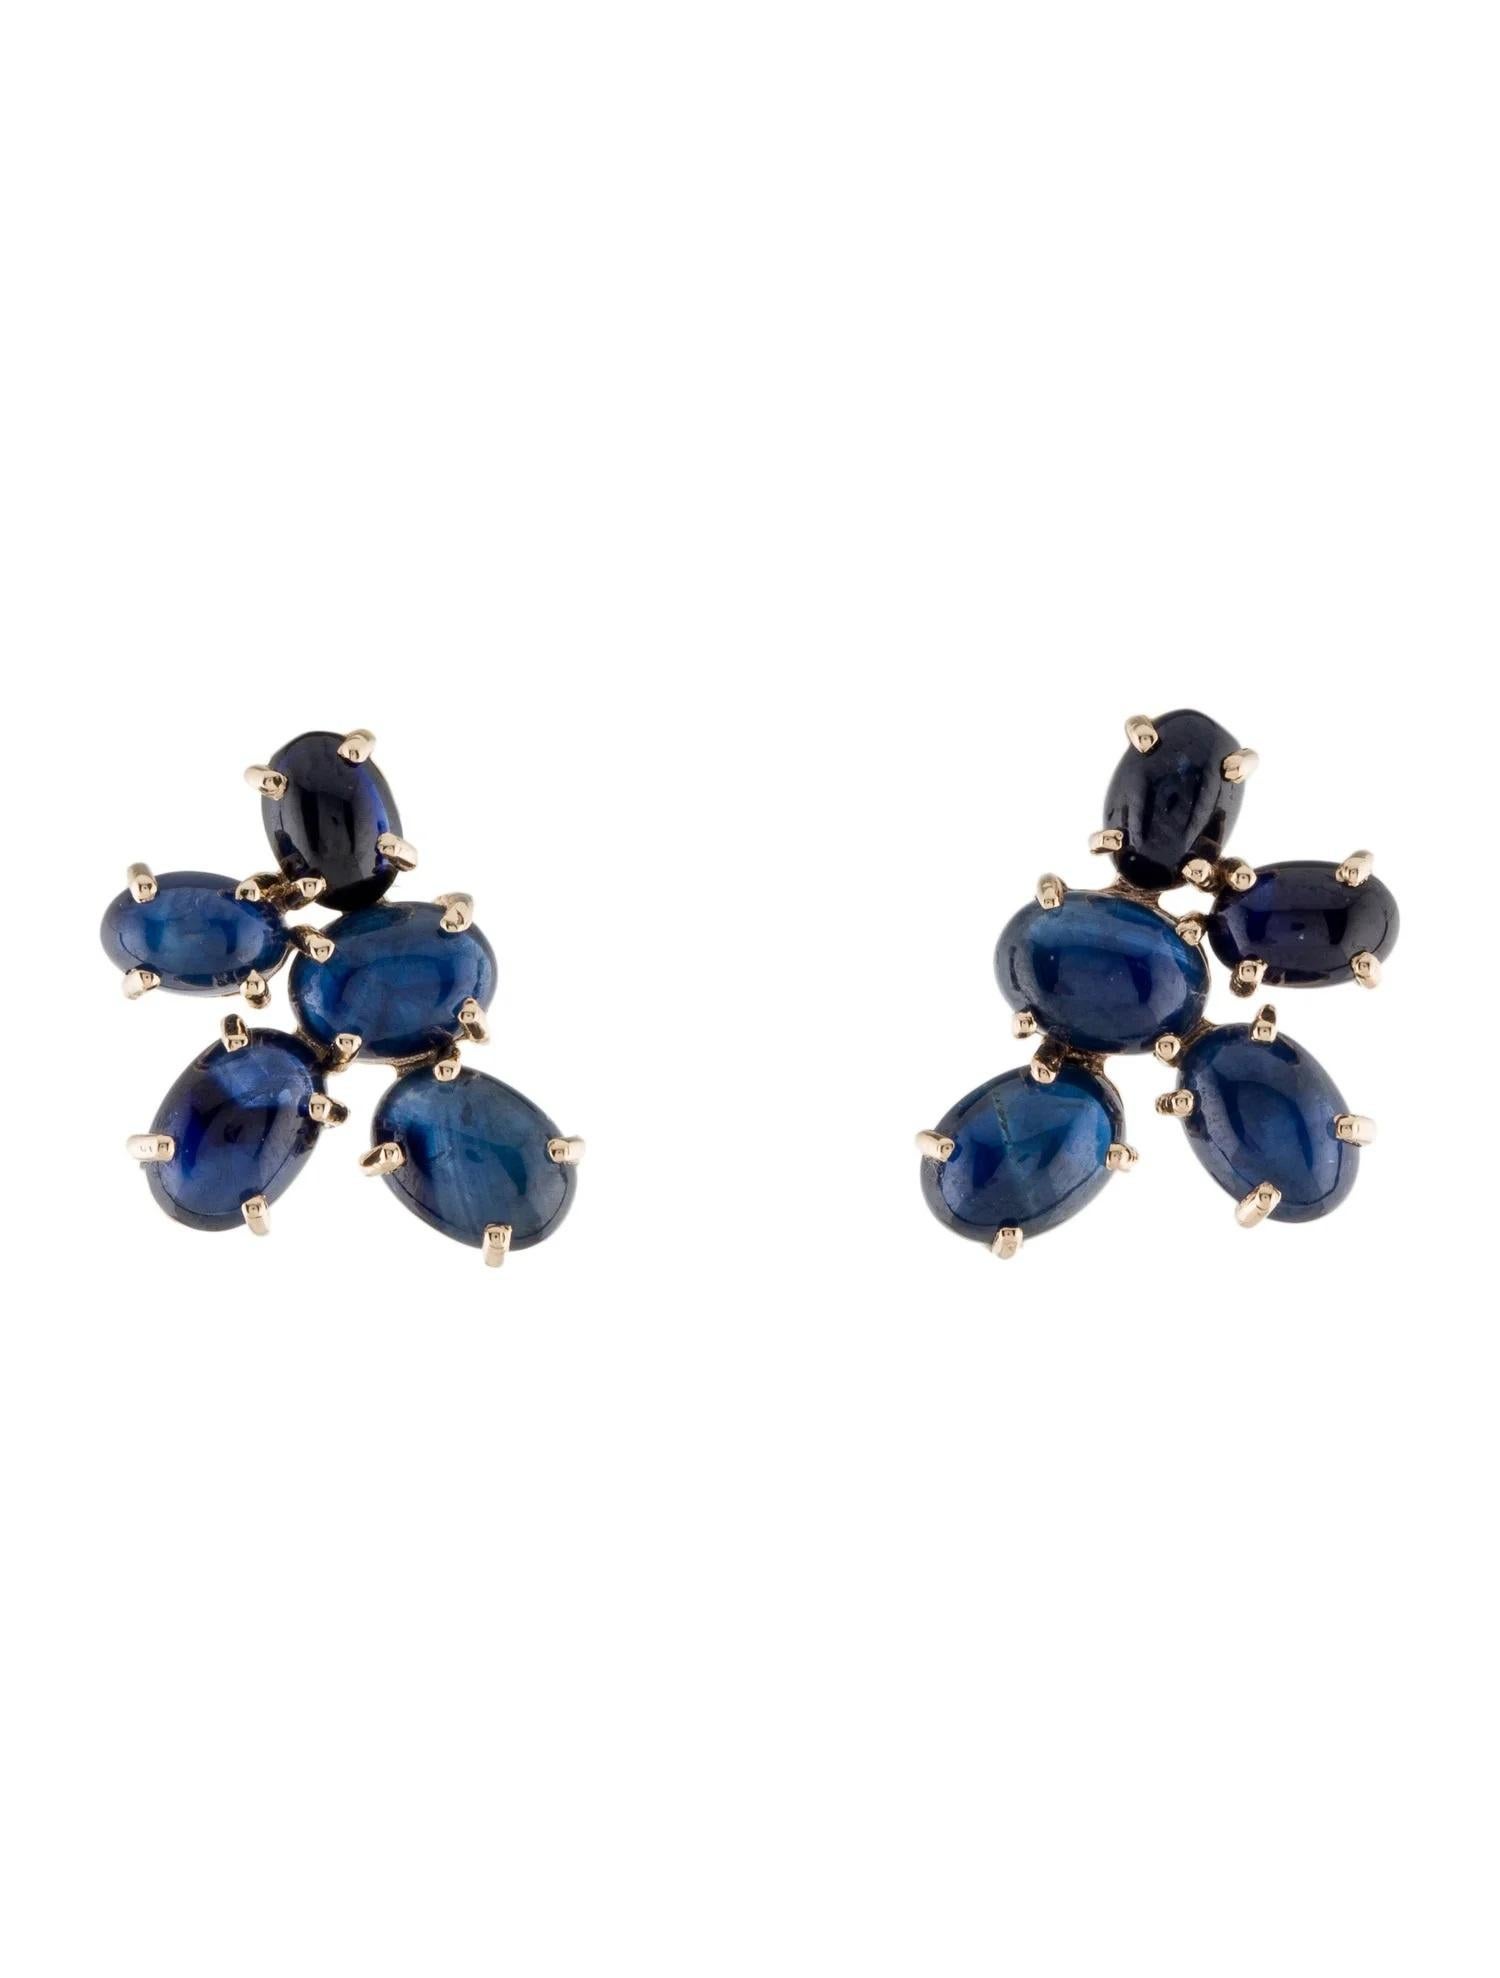 Oval Cut 14K Yellow Gold Sapphire Drop Stud Earrings, 10.44ctw Oval Cabochon Blue Stones For Sale